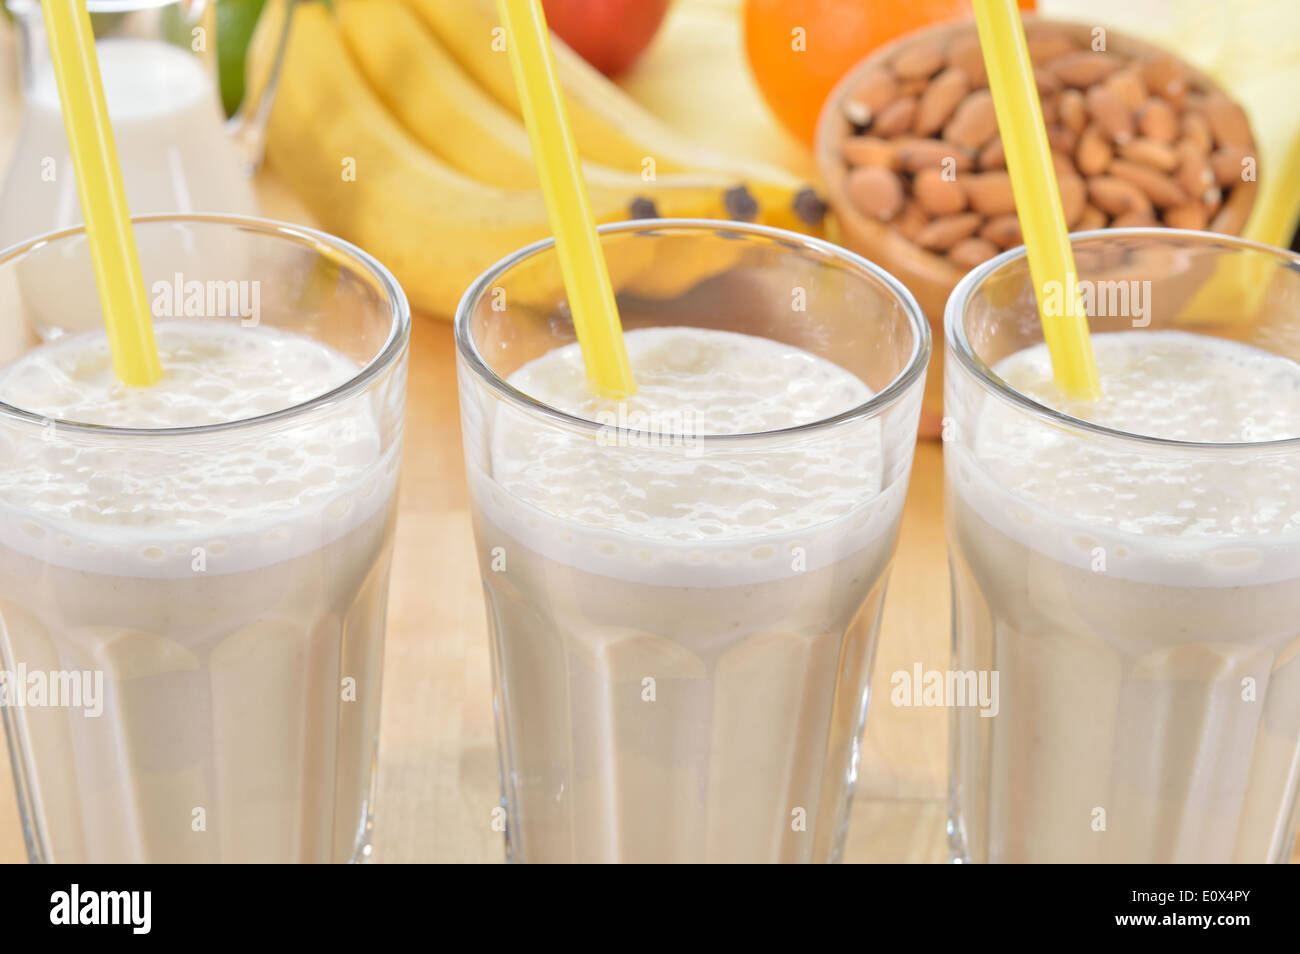 Banana and almond milk smoothie in a glass on a kitchen table. Summer drink made of banana, almond milk and few dactyl. Stock Photo